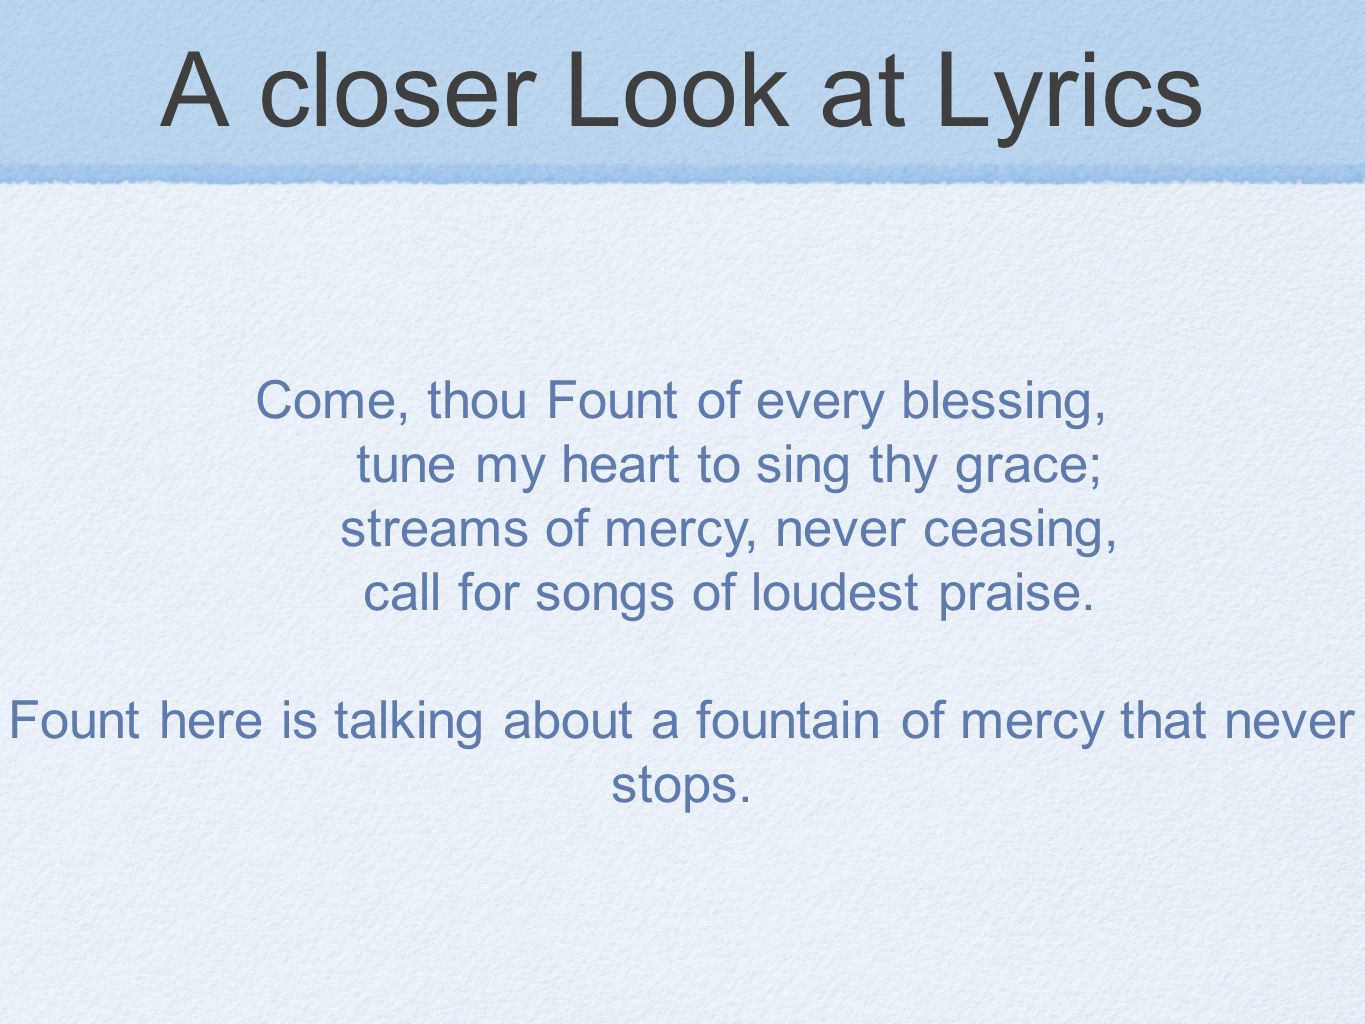 A closer Look at Lyrics Come, thou Fount of every blessing, tune my heart to sing thy grace; streams of mercy, never ceasing, call for songs of loudest praise.